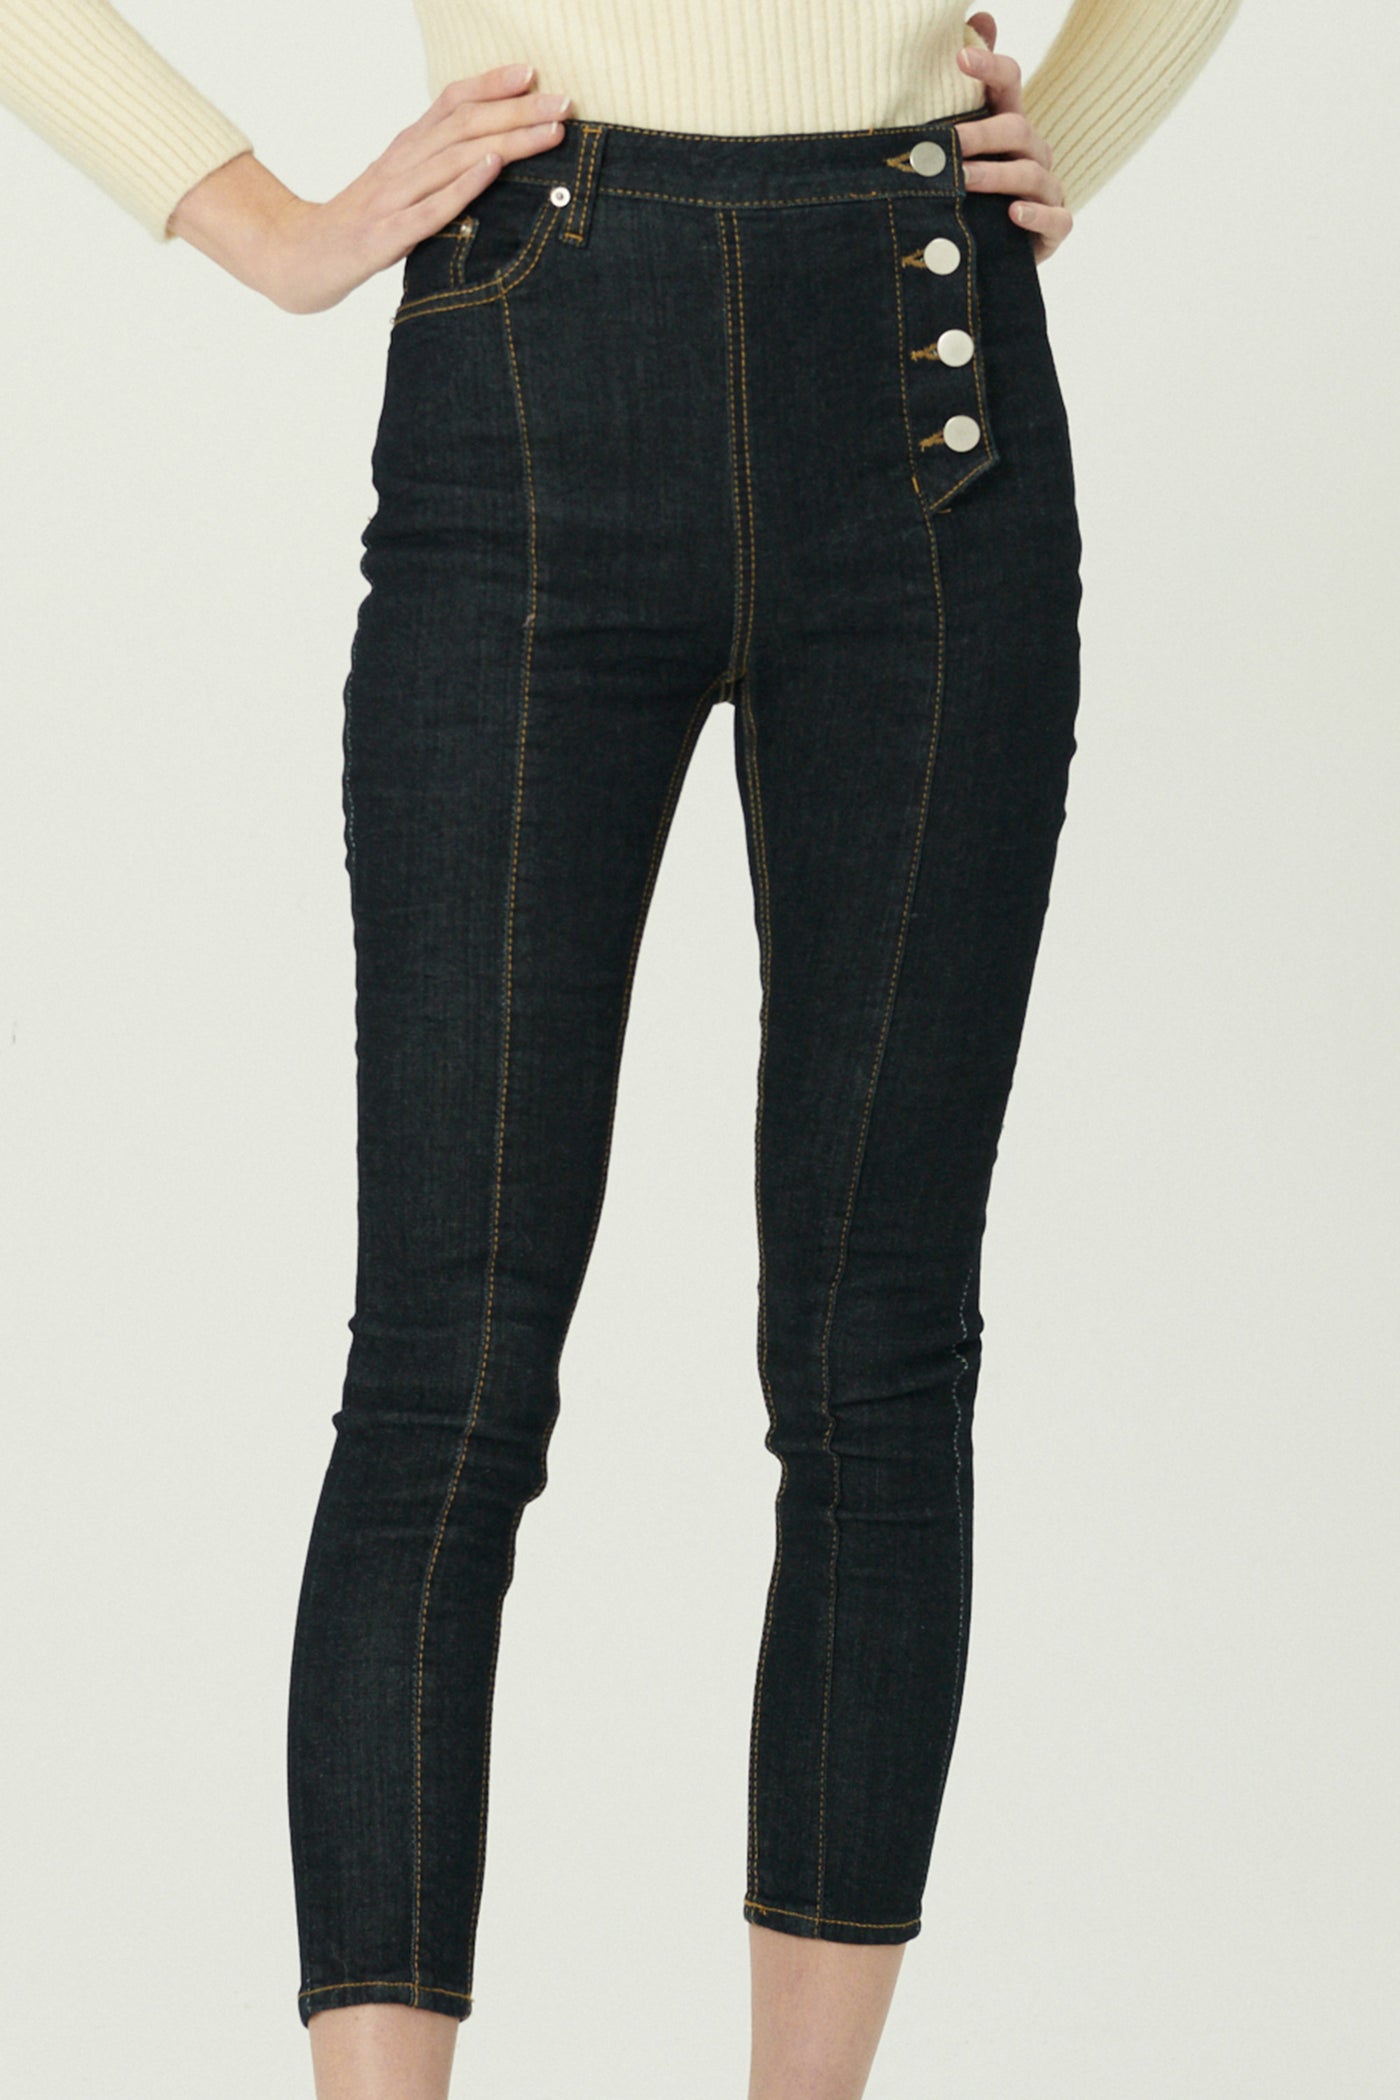 storets.com Riley Side Button Down Skinny Jeans